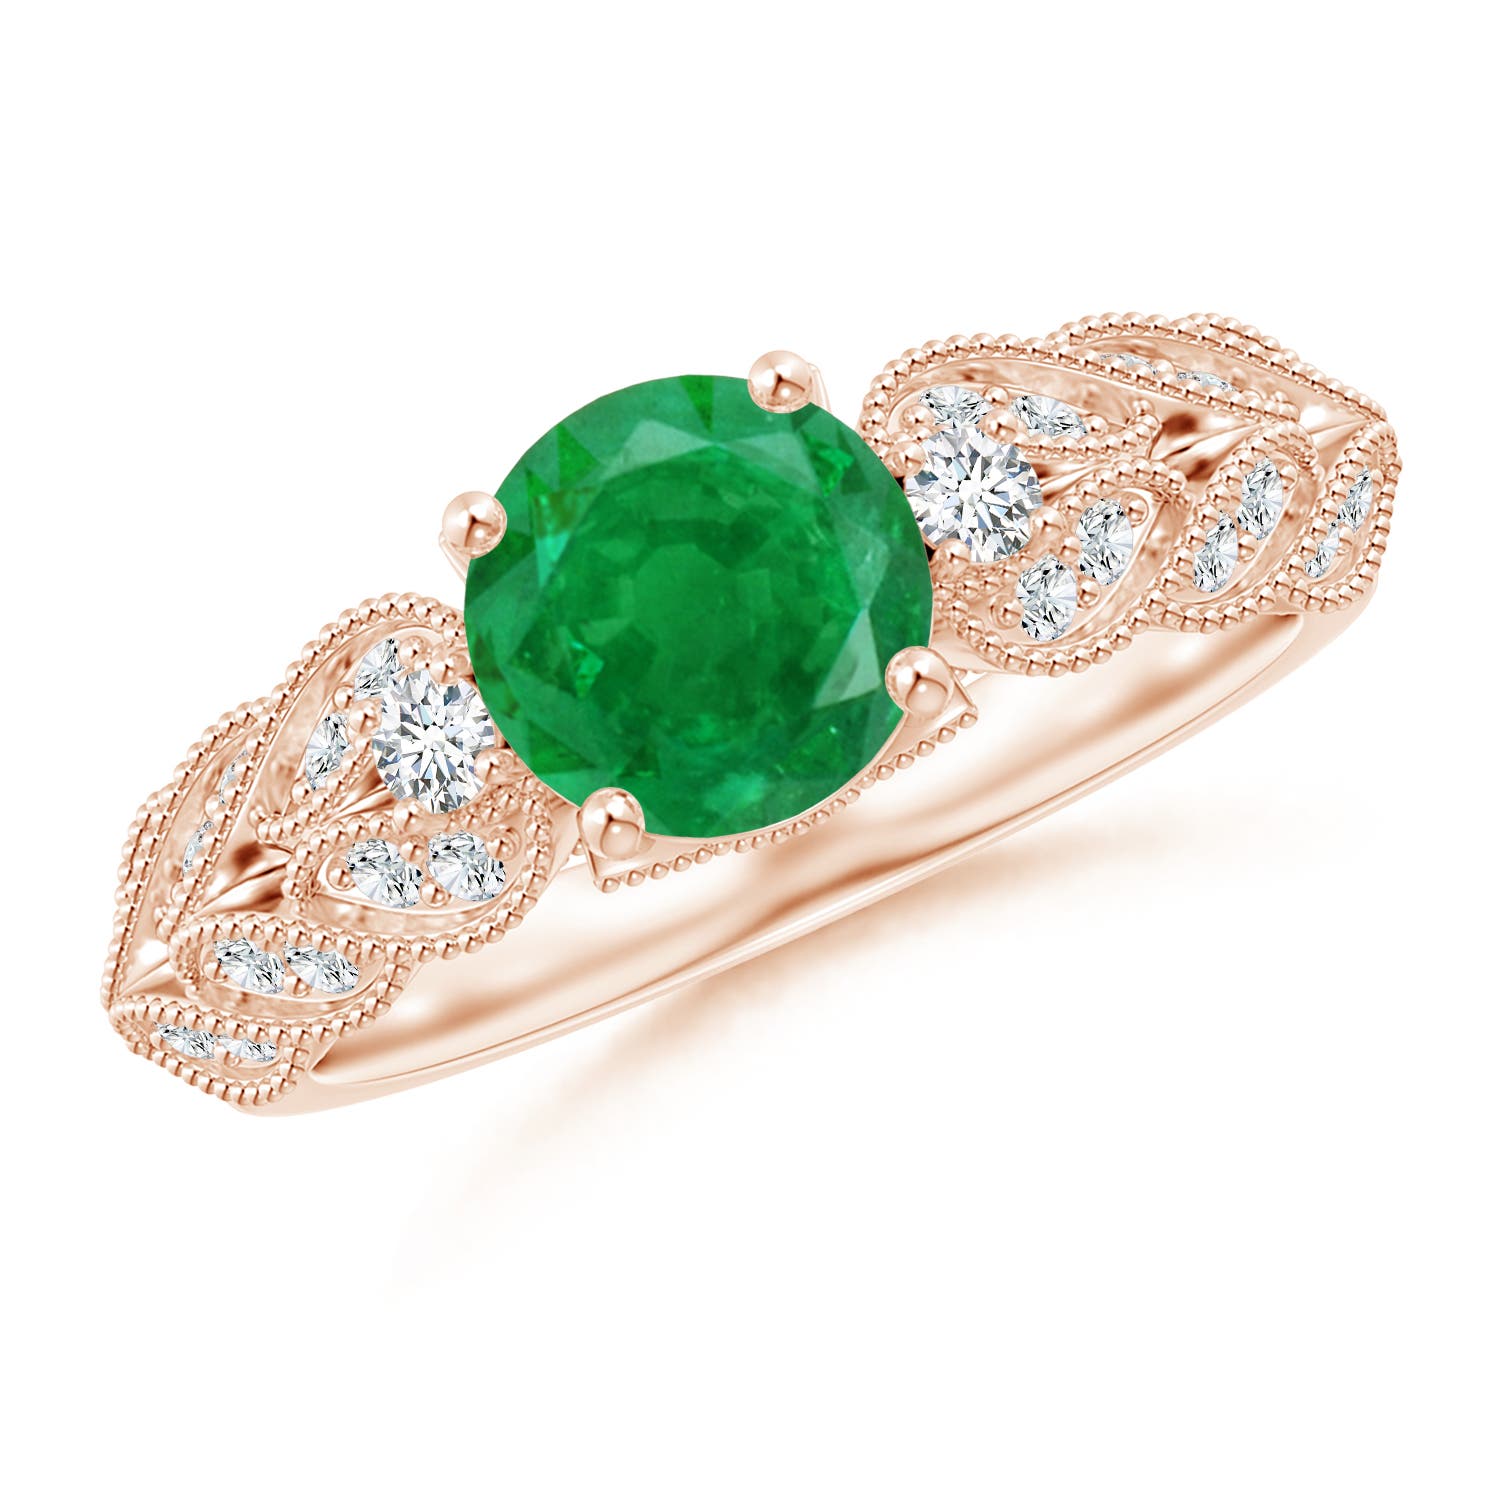 AA - Emerald / 1.47 CT / 14 KT Rose Gold